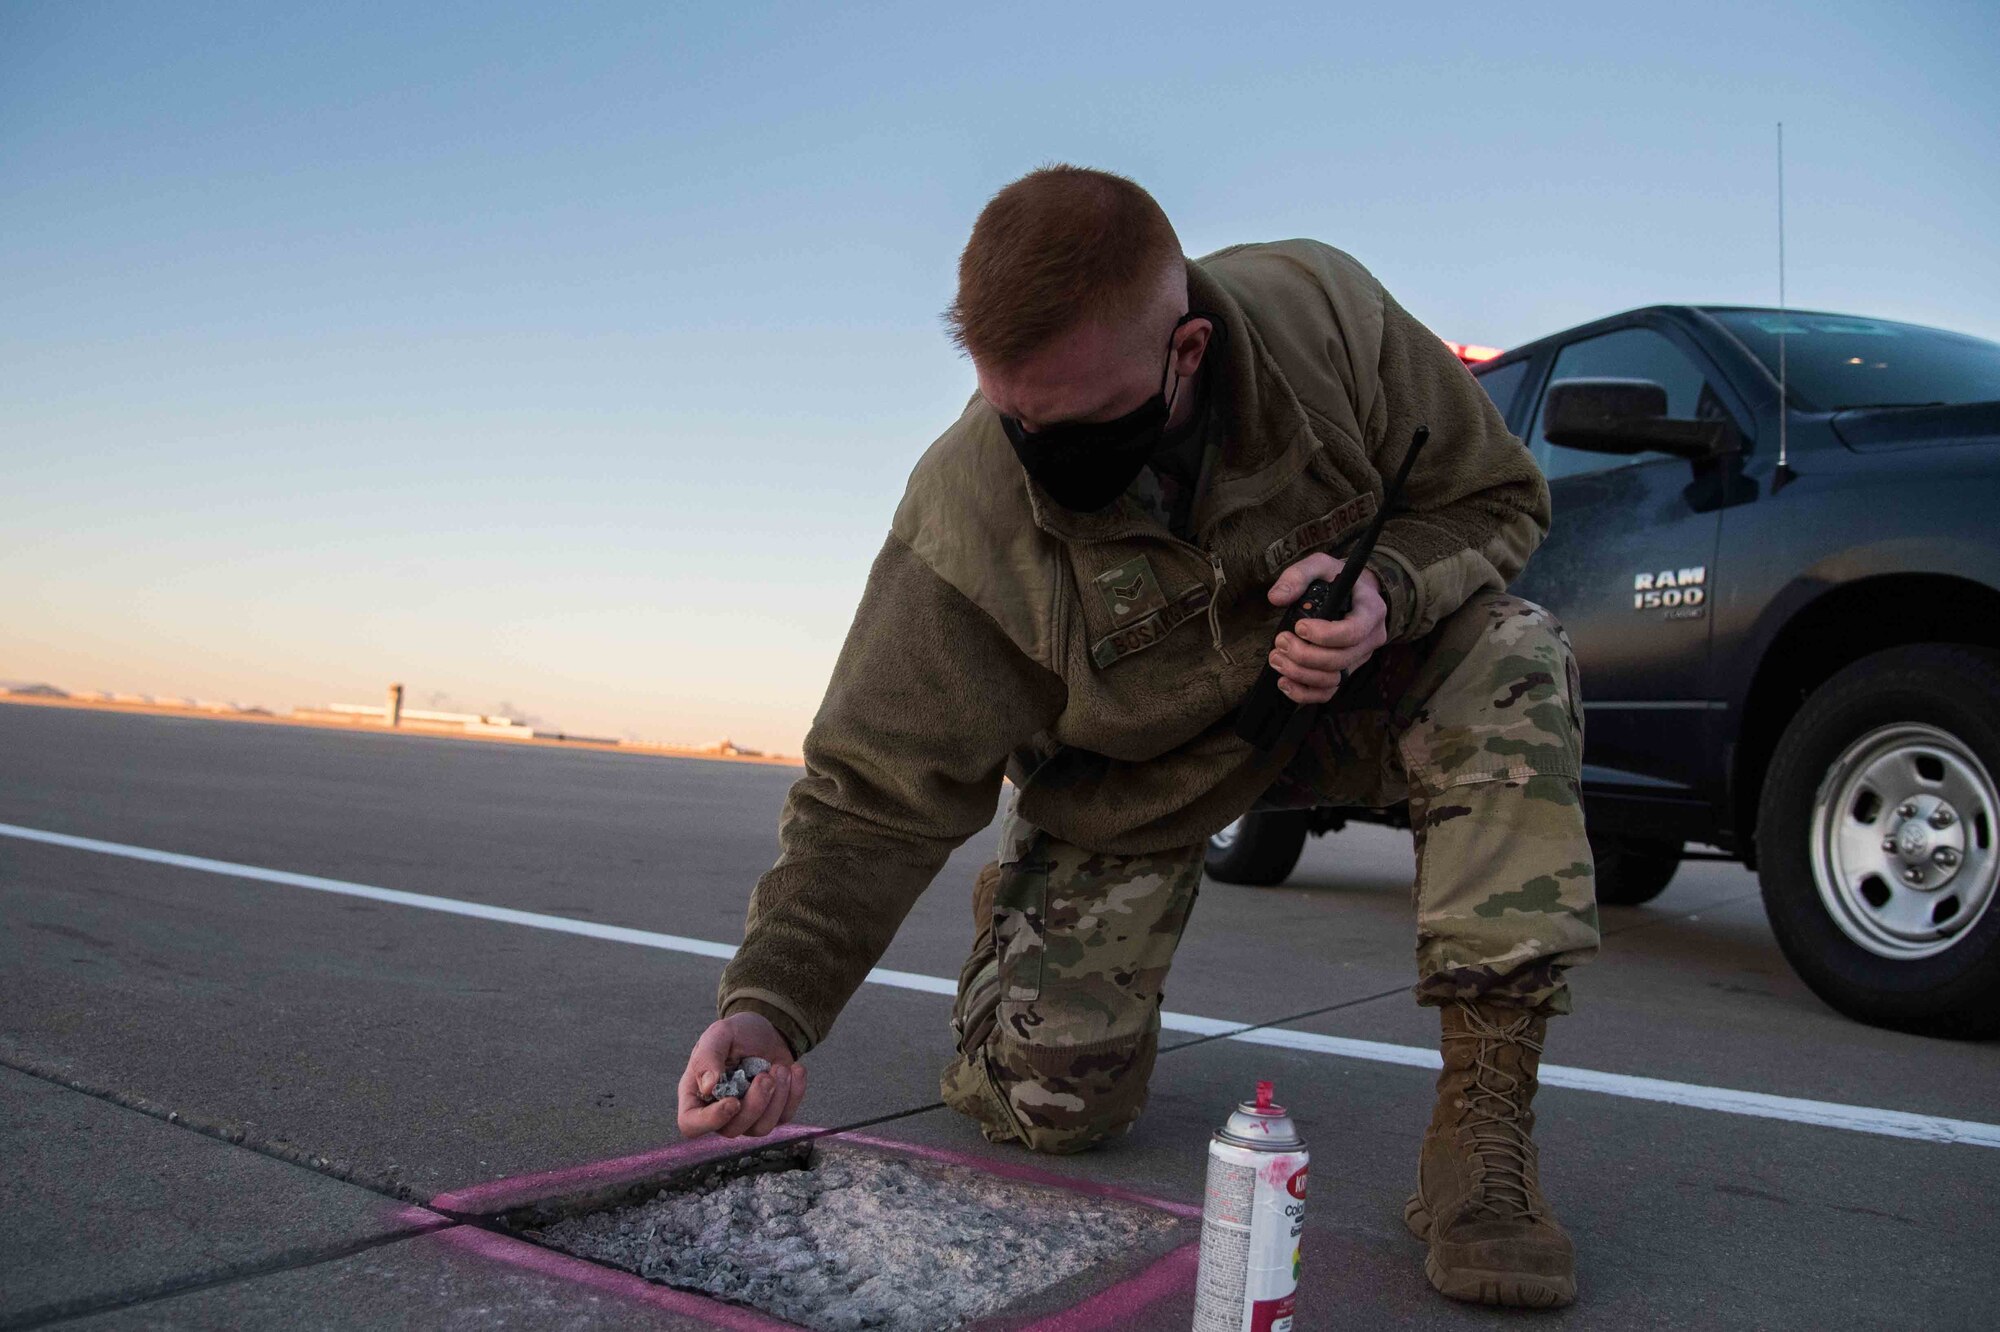 Airman 1st Class Douglas Bosarge, 22nd Operations Support Squadron airfield management journeyman, picks up foreign object debris on the flightline Dec. 4, 2020, at McConnell Air Force Base, Kansas. The airfield management team is required to conduct at least one visual inspections daily to prevent any hazards during aircraft operations. (U.S. Air Force photo by Senior Airman Alexi Bosarge)